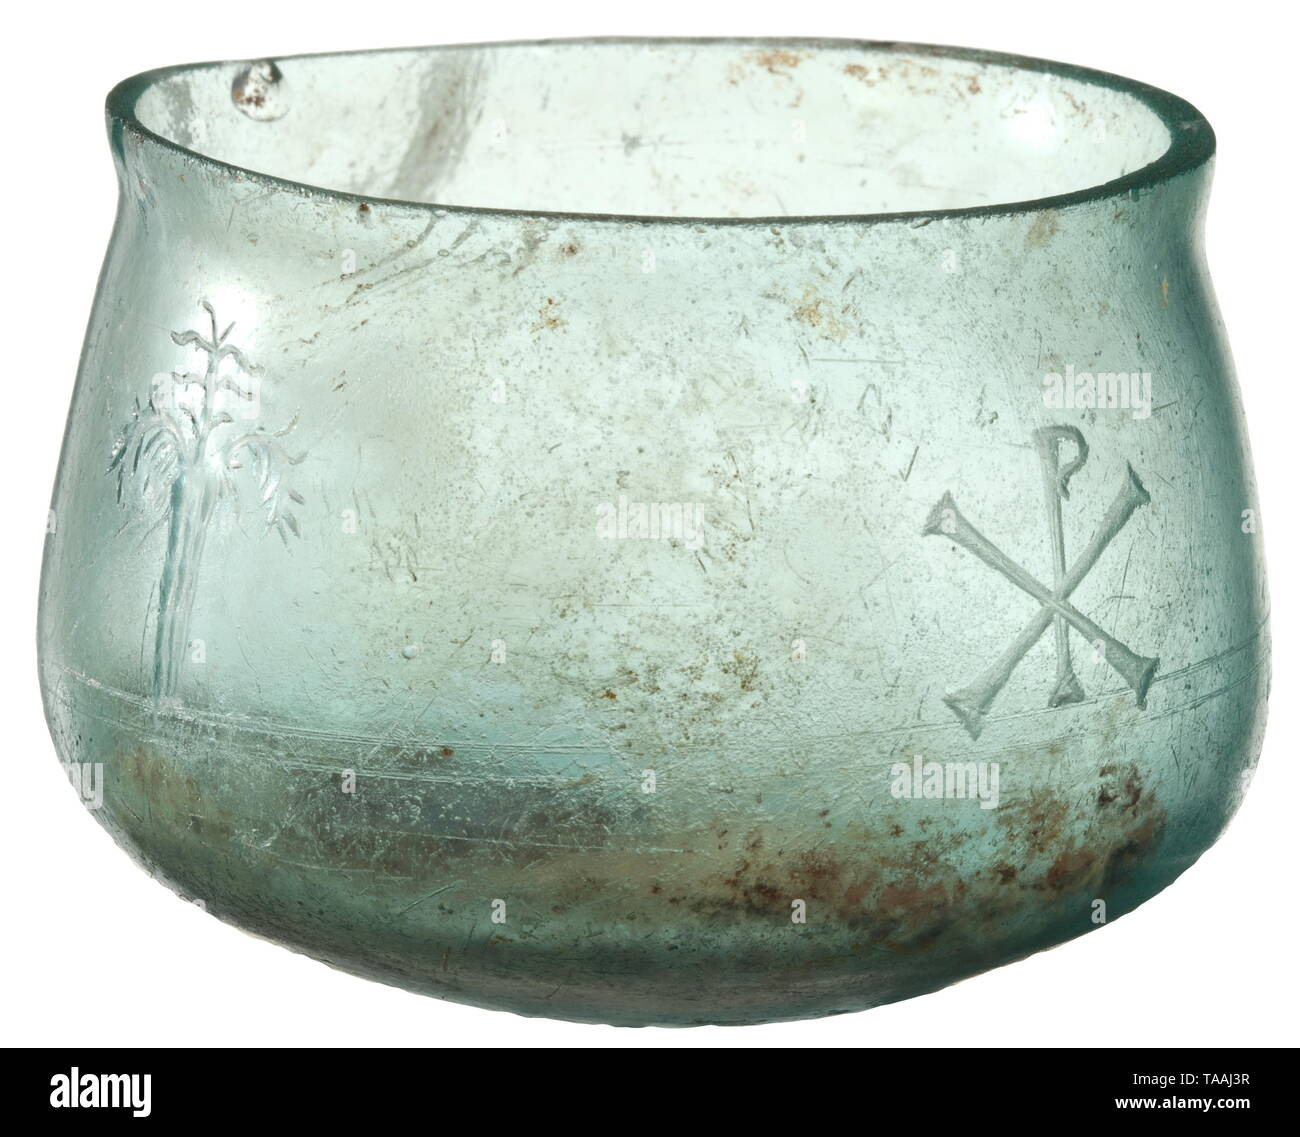 A late Roman glass cup cut with early Christian motifs, 2nd half of 4th century Transparent, slightly bellied cup with change in the lower quarter and re-cut rim. On the exterior above the inward curve two thin grooves, surmounted by four cut motifs: two trees flanking a lamb and a chi-rho symbol. High-quality work with minimal chippings at the edge, otherwise well preserved. In the interior partially chipped iris. Height 5.9 cm. Maximal diameter 8.3 cm. Provenance: Rhenian art dealer, Ex Coll. W.W, acquired in the 1980s. historic, historical, Ro, Additional-Rights-Clearance-Info-Not-Available Stock Photo